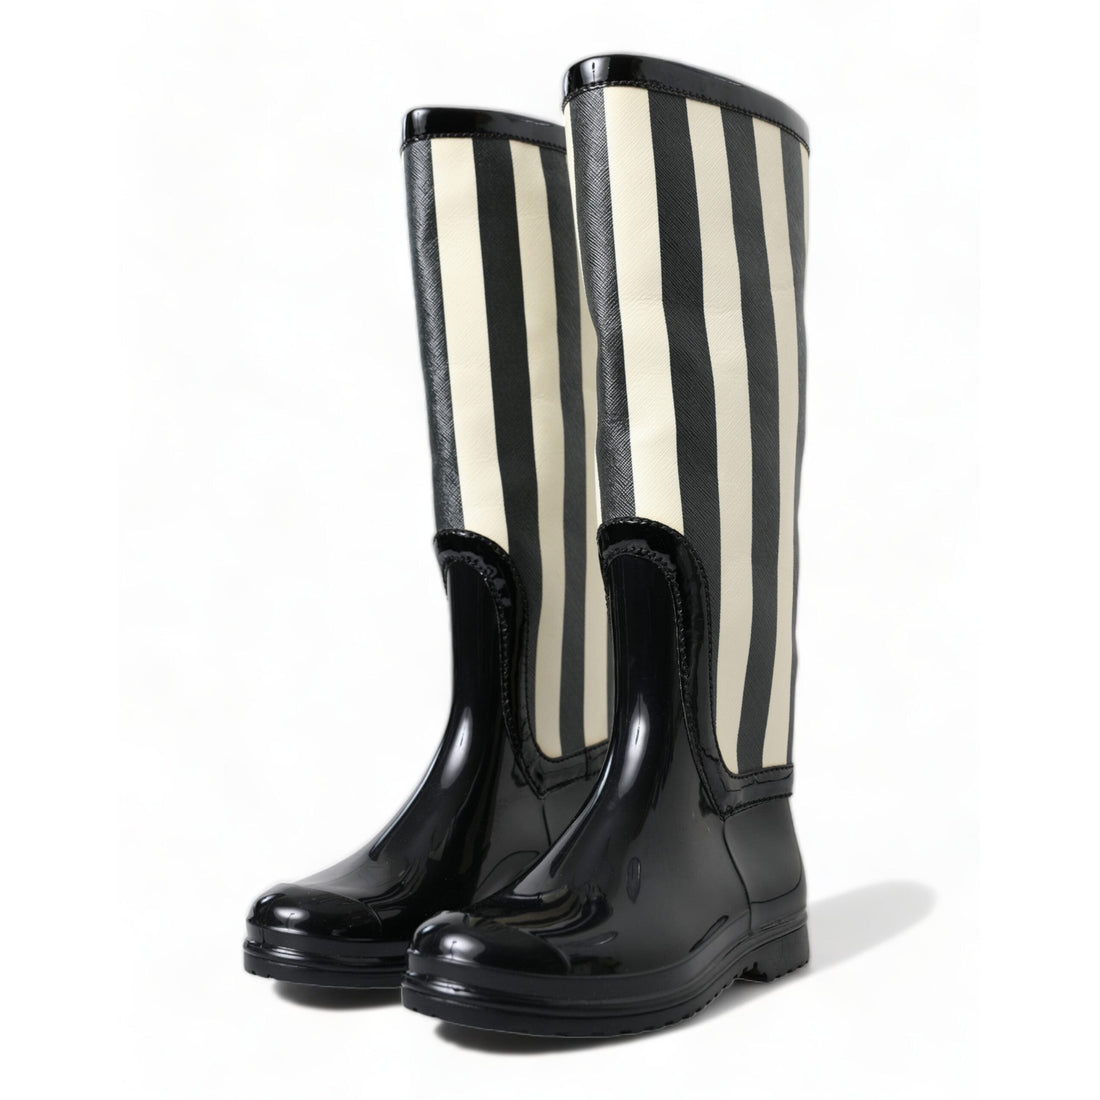 Dolce & Gabbana Black and White Striped Knee High Boots